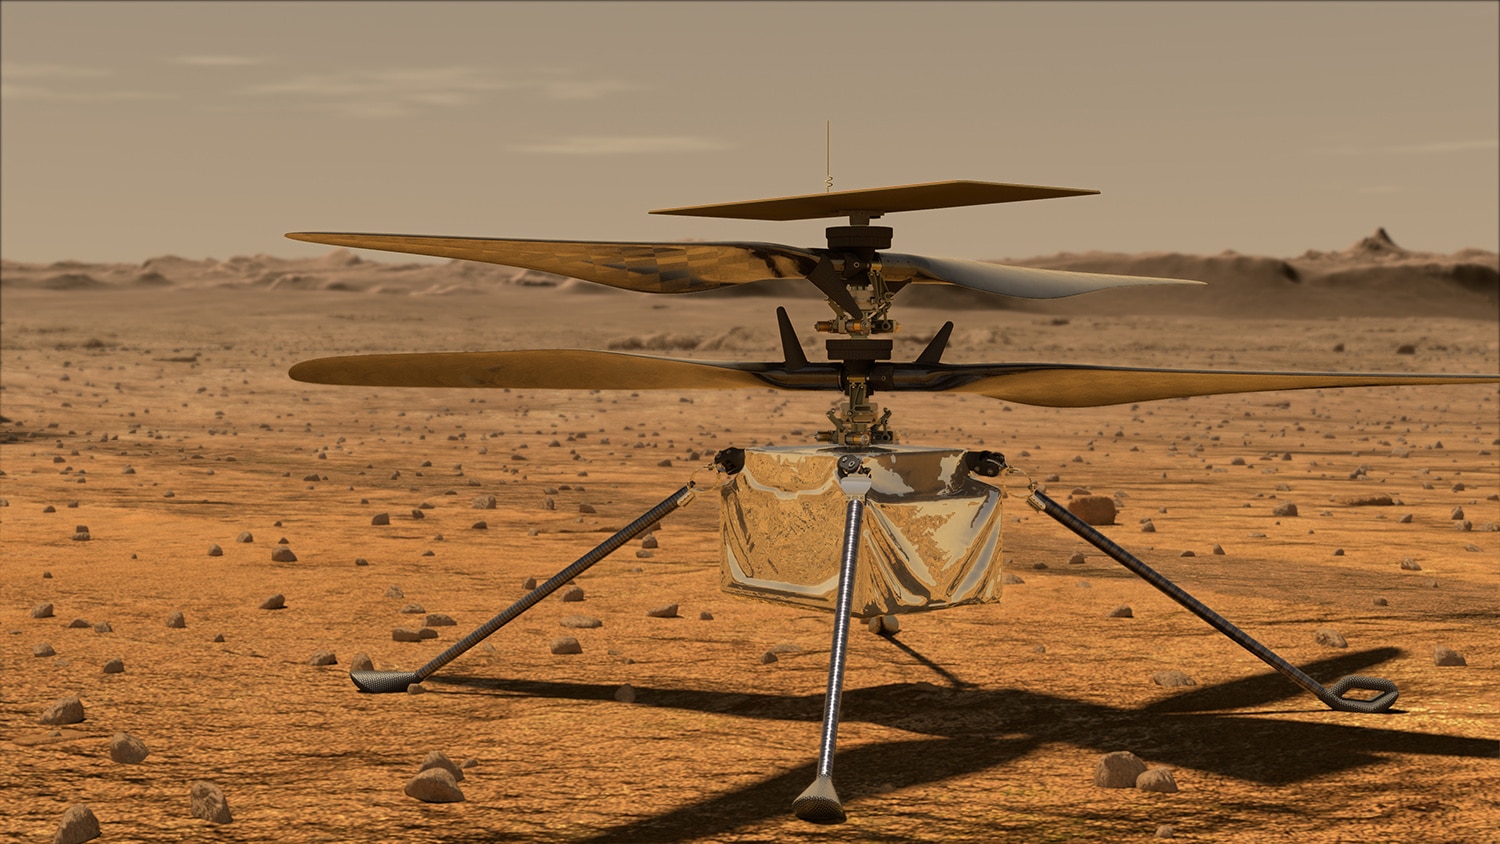 Ingenuity Mars Helicopter delayed its Flight 14 because of an anomaly.